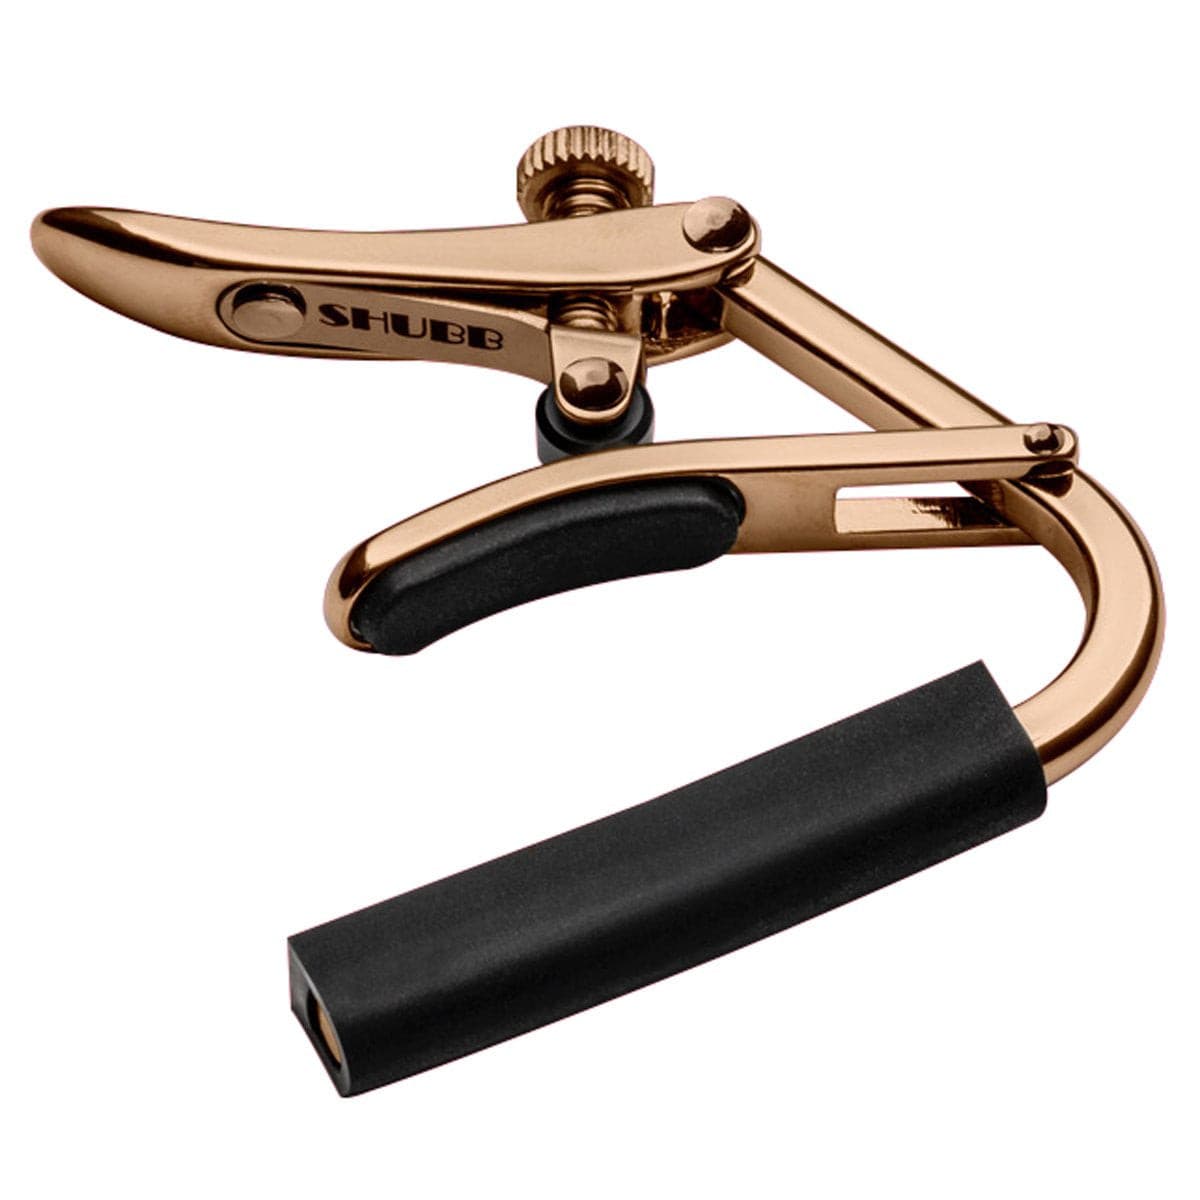 Shubb 'Capo Royale' Steel String Guitar Capo - Rose Gold, Accessory for sale at Richards Guitars.